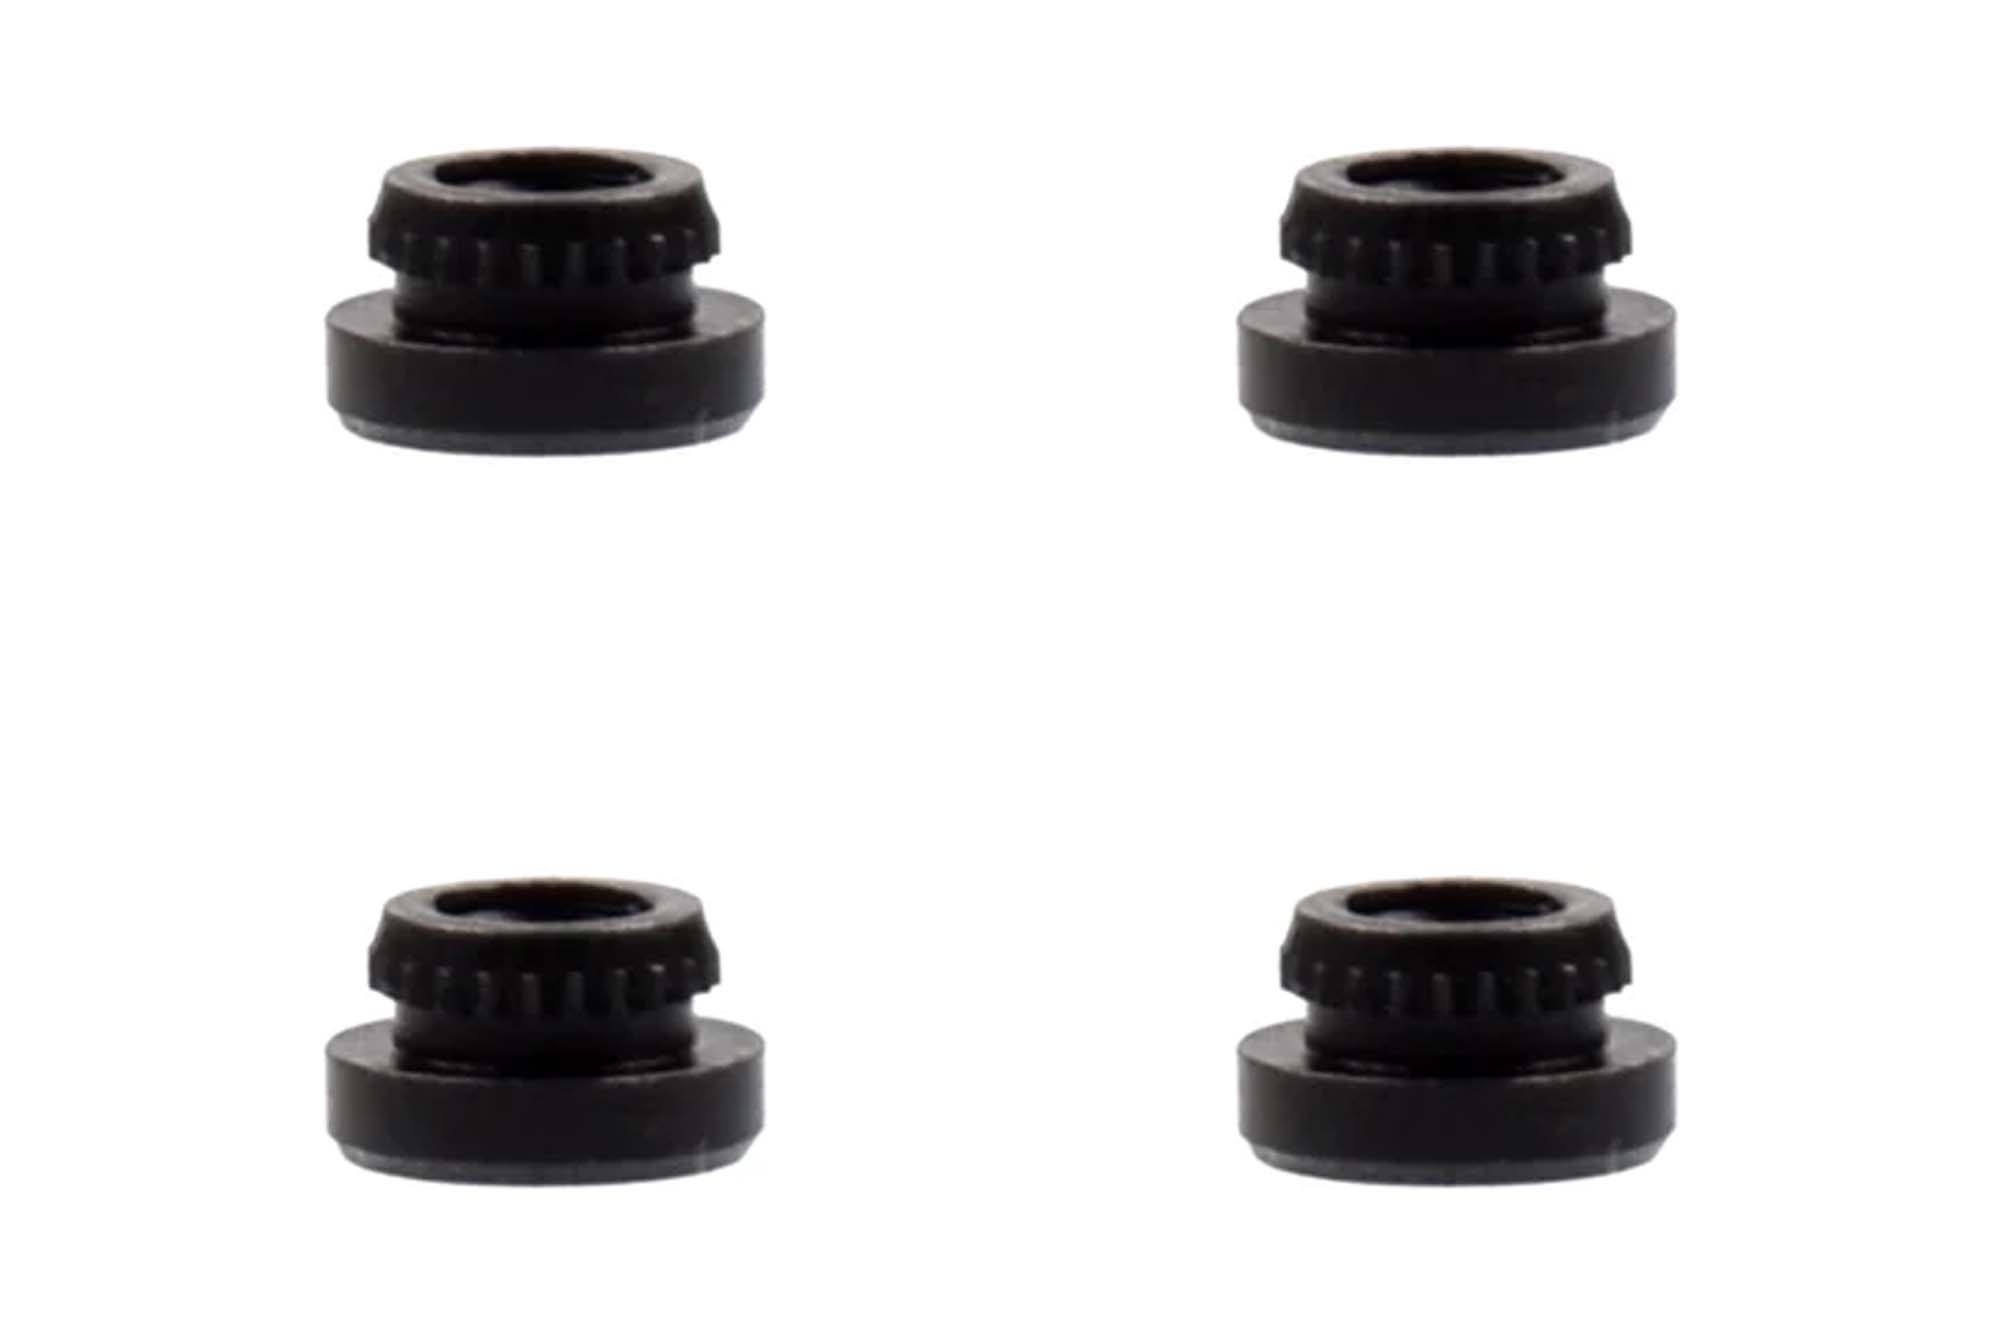 BetaFPV M2 Clamping Nuts